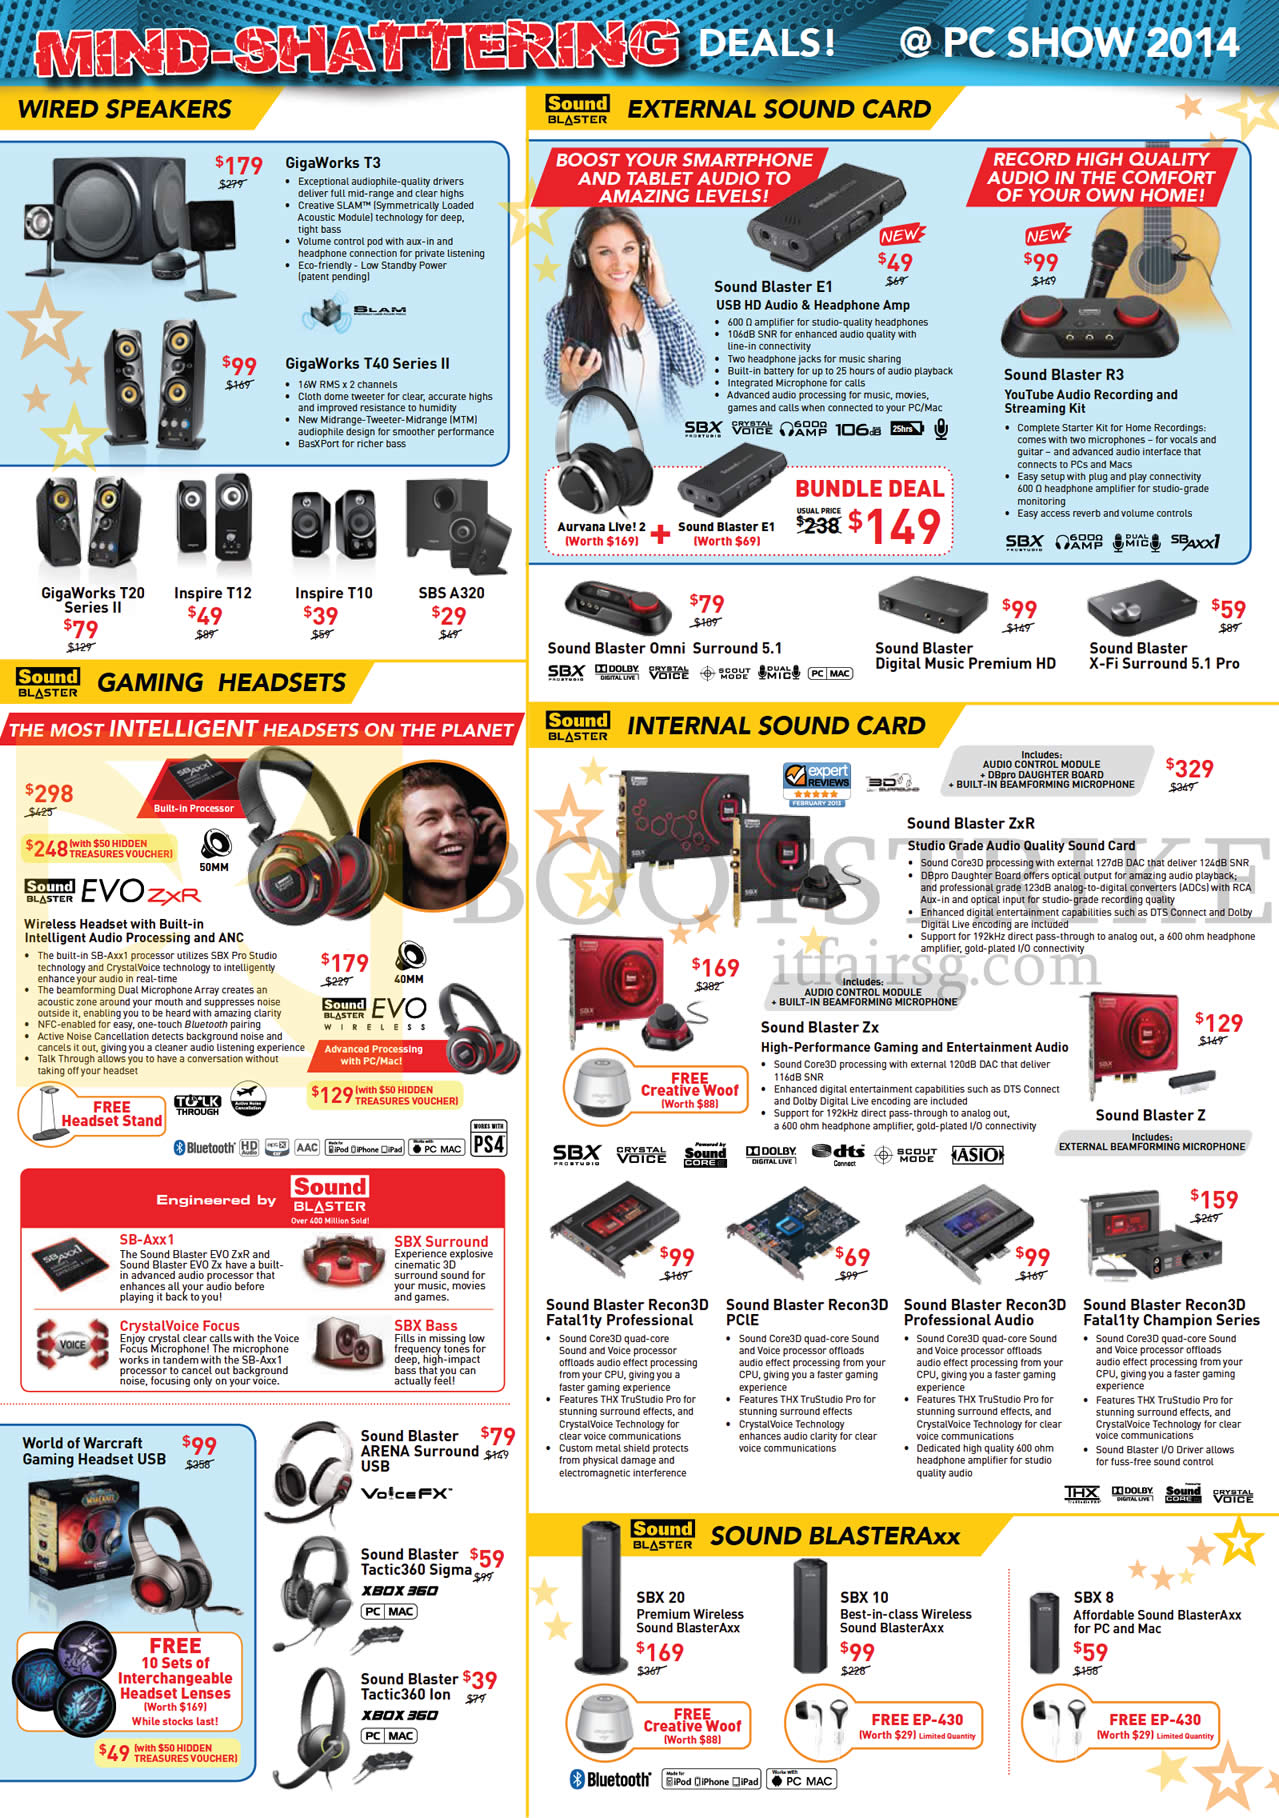 PC SHOW 2014 price list image brochure of Creative Speakers, Soundcard, Gaming Headsets, Sound Blaster Axx, Gigaworks T3, T40 Series, Evo ZXR, E1, R3, ZX, SBX 20, 10, 8